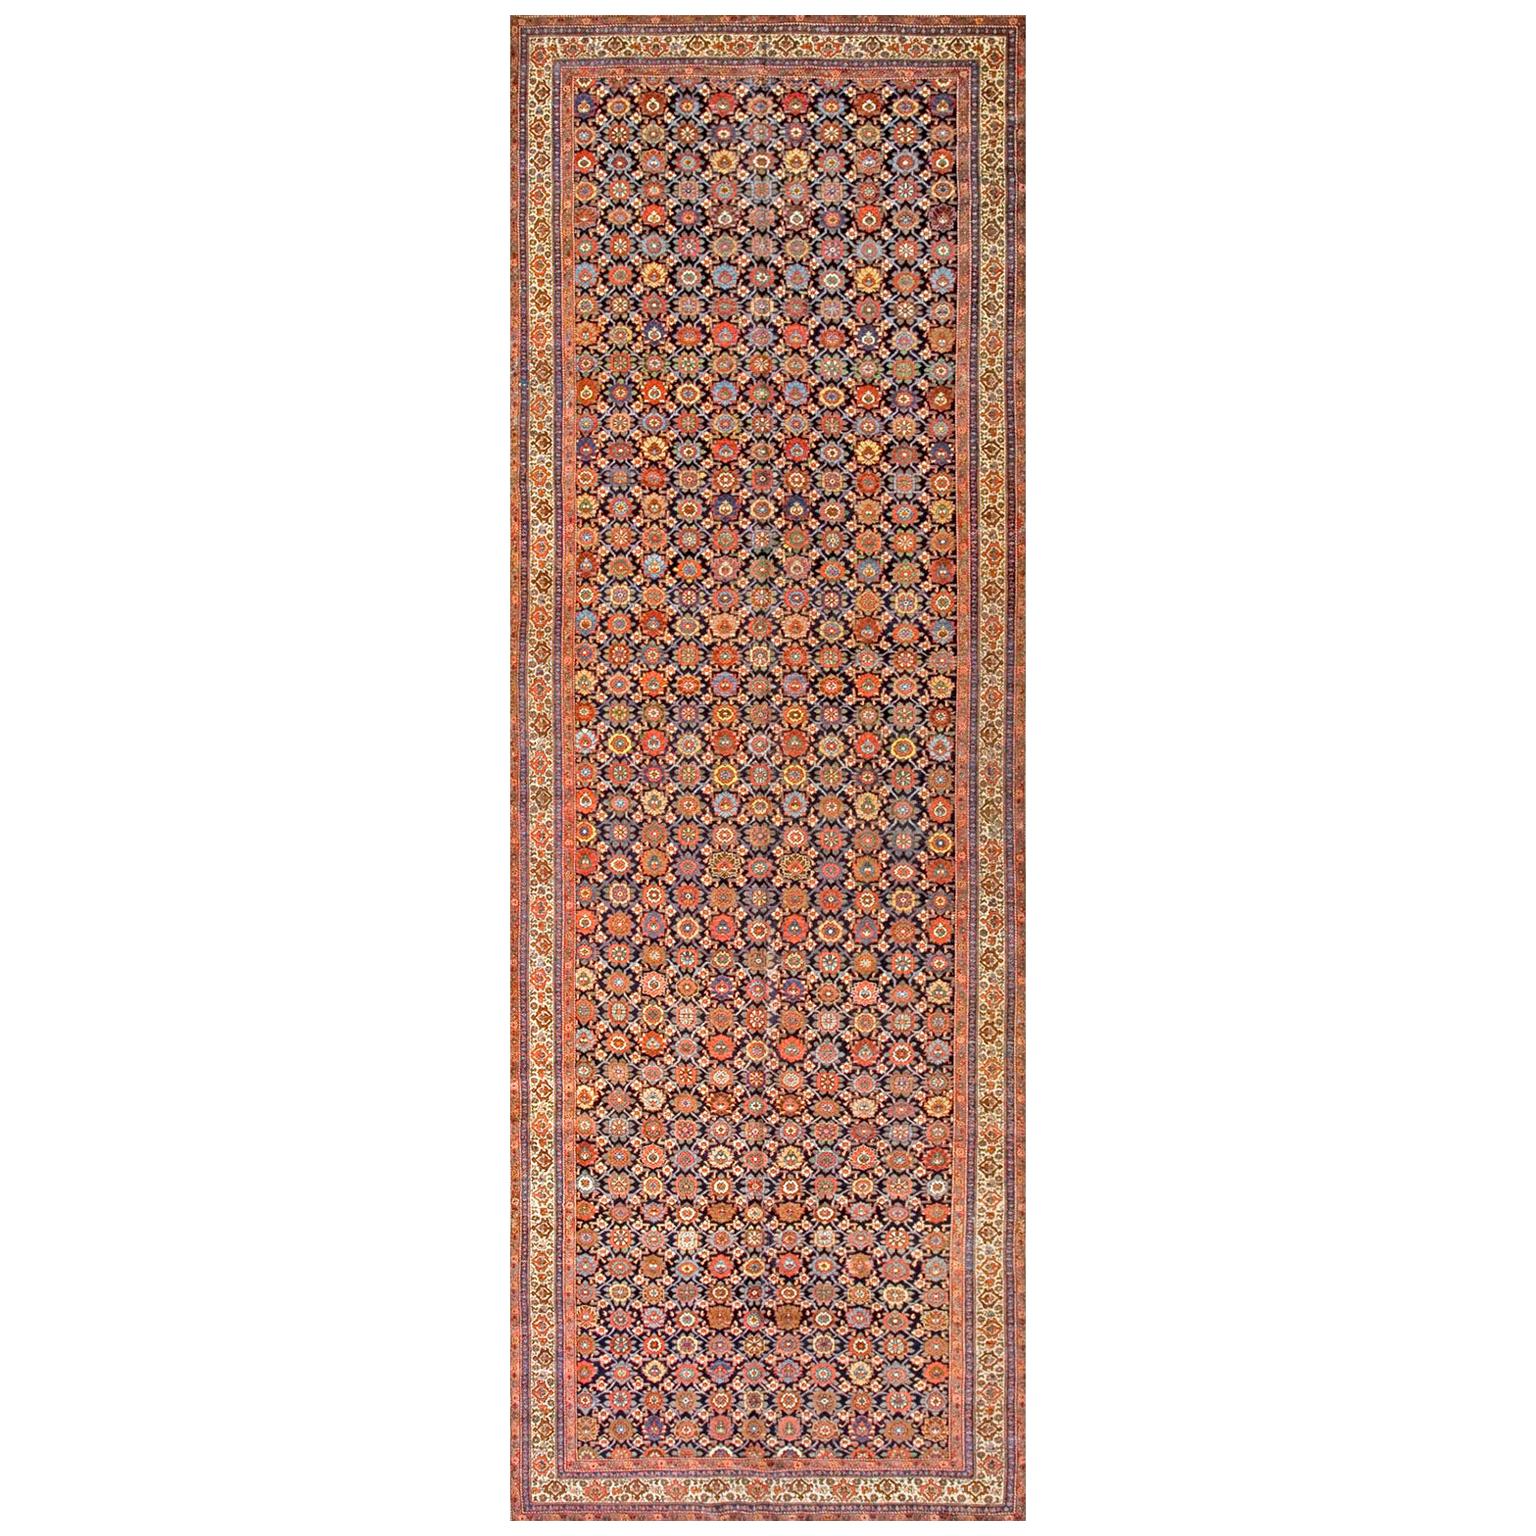 19th Century N.W. Persian Gallery Carpet ( 6'6" x 19' - 198 x 579 ) For Sale